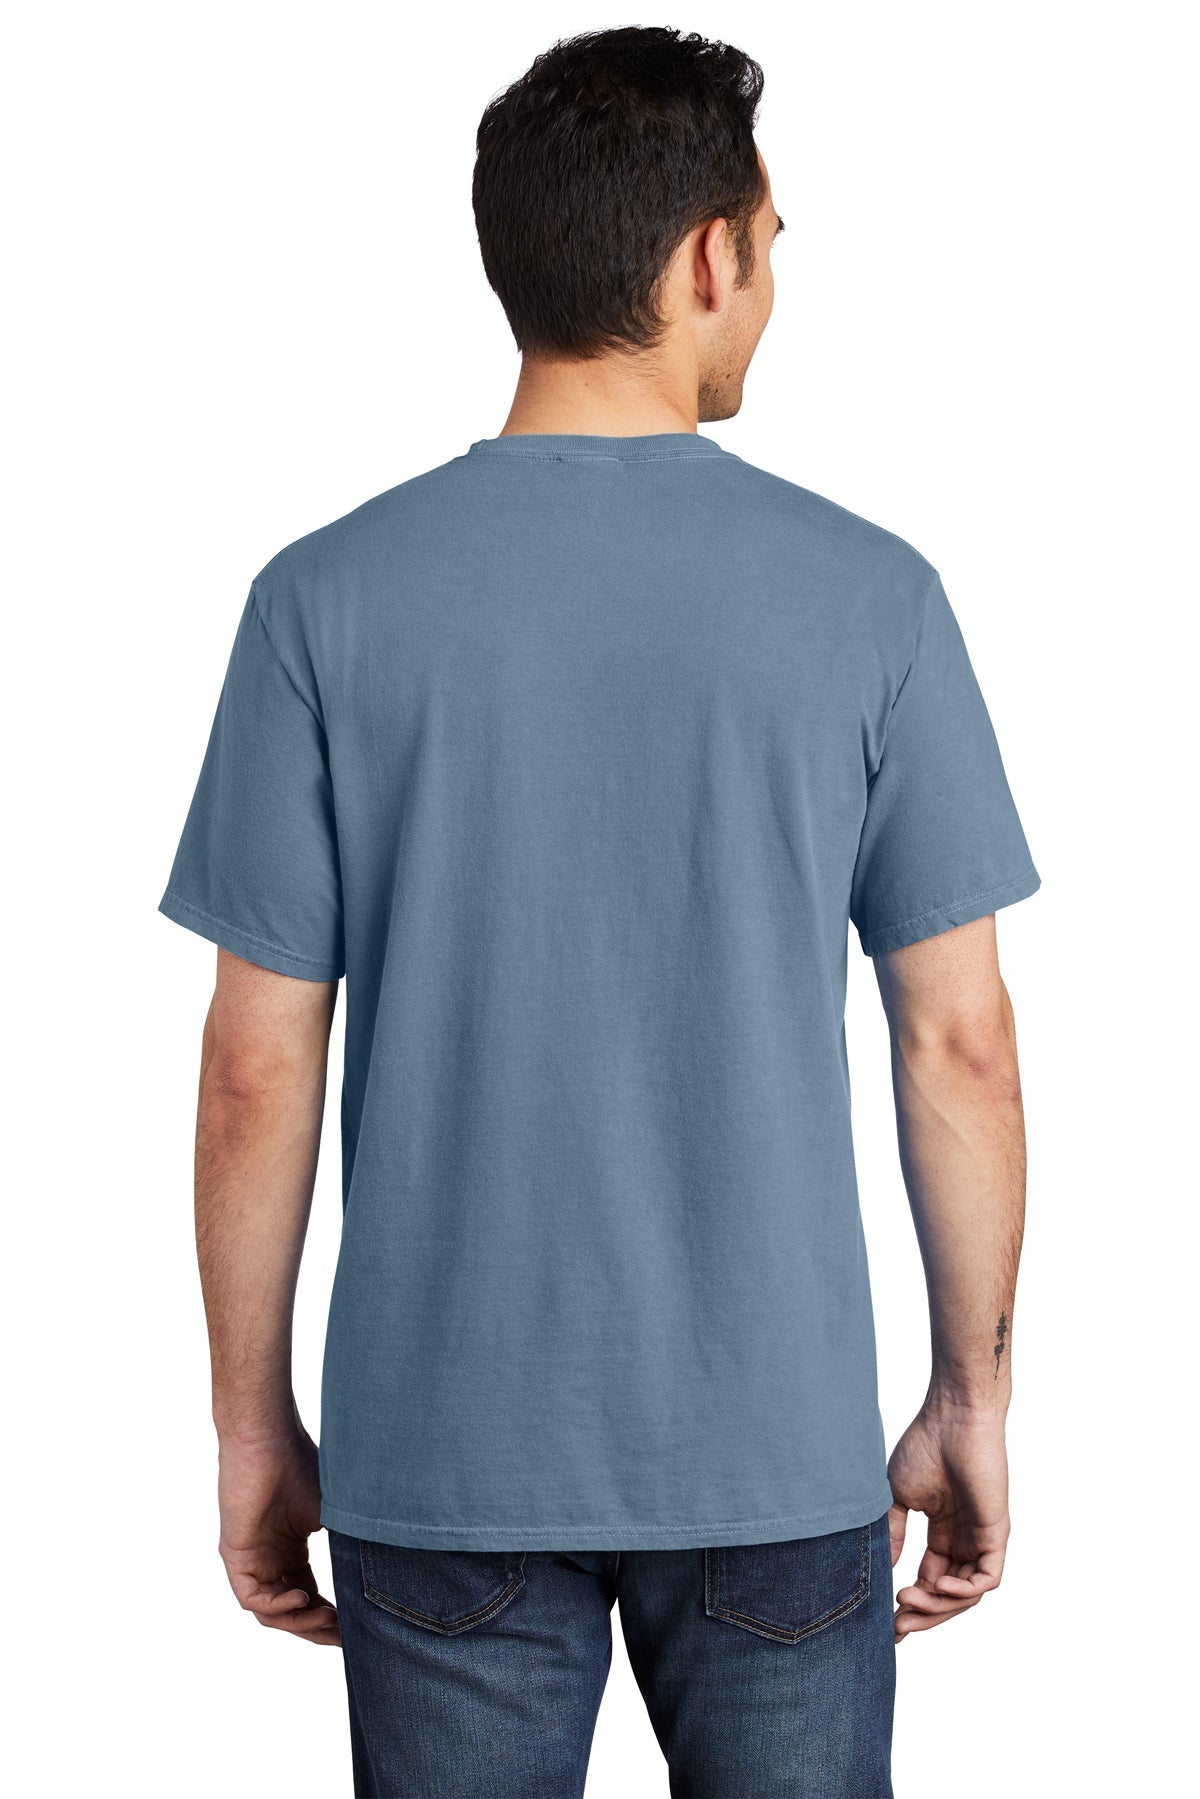 Port & Company Pigment-Dyed Pocket Tee